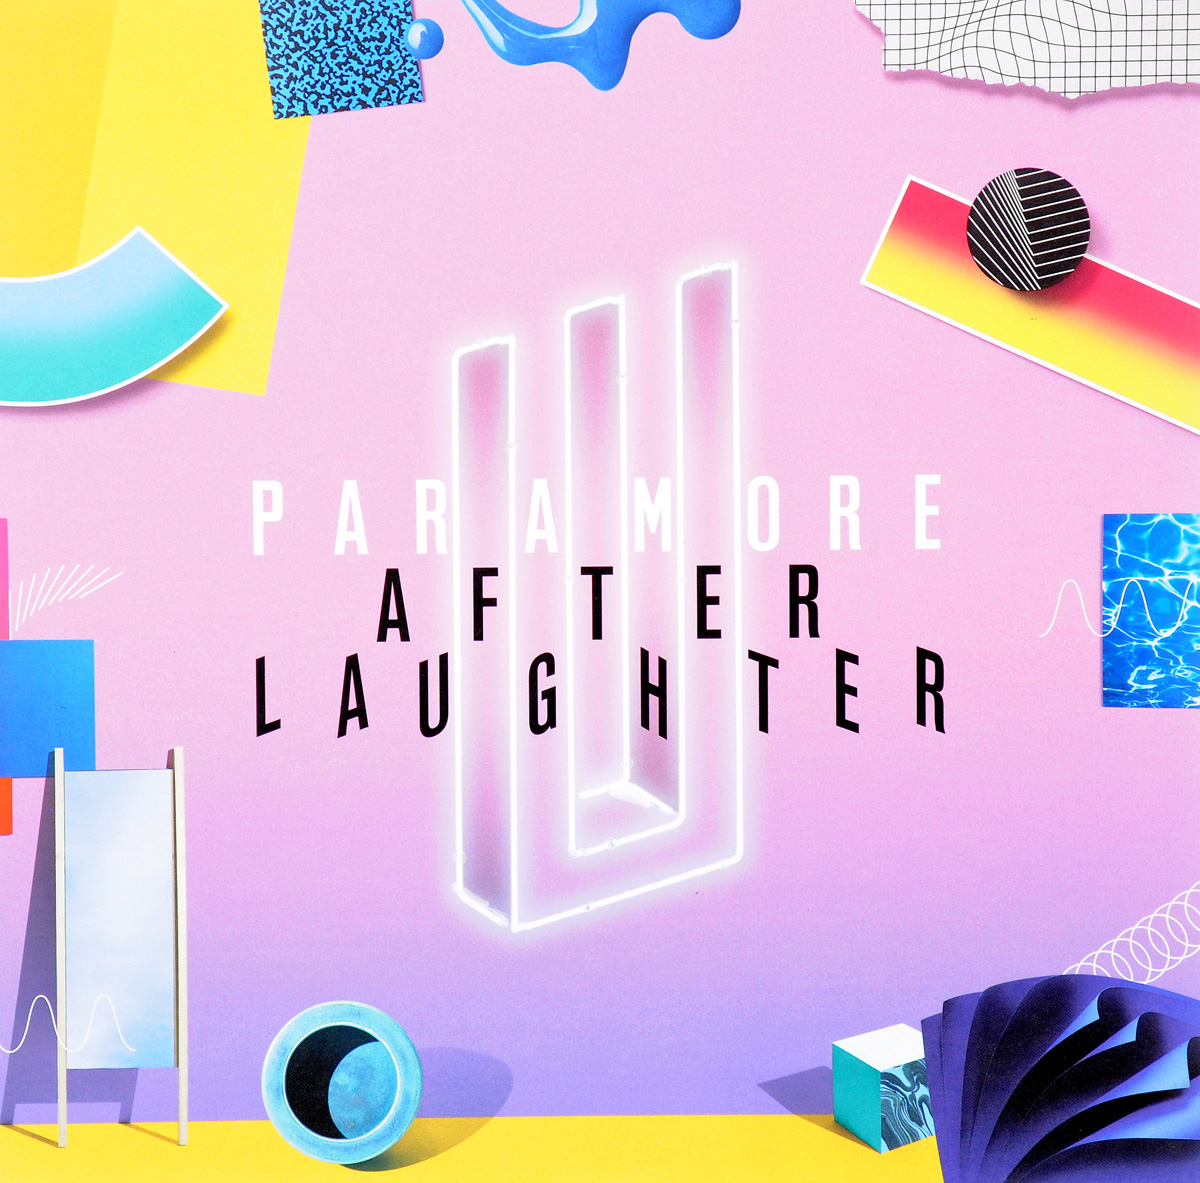 Paramore. After Laughter (LP)